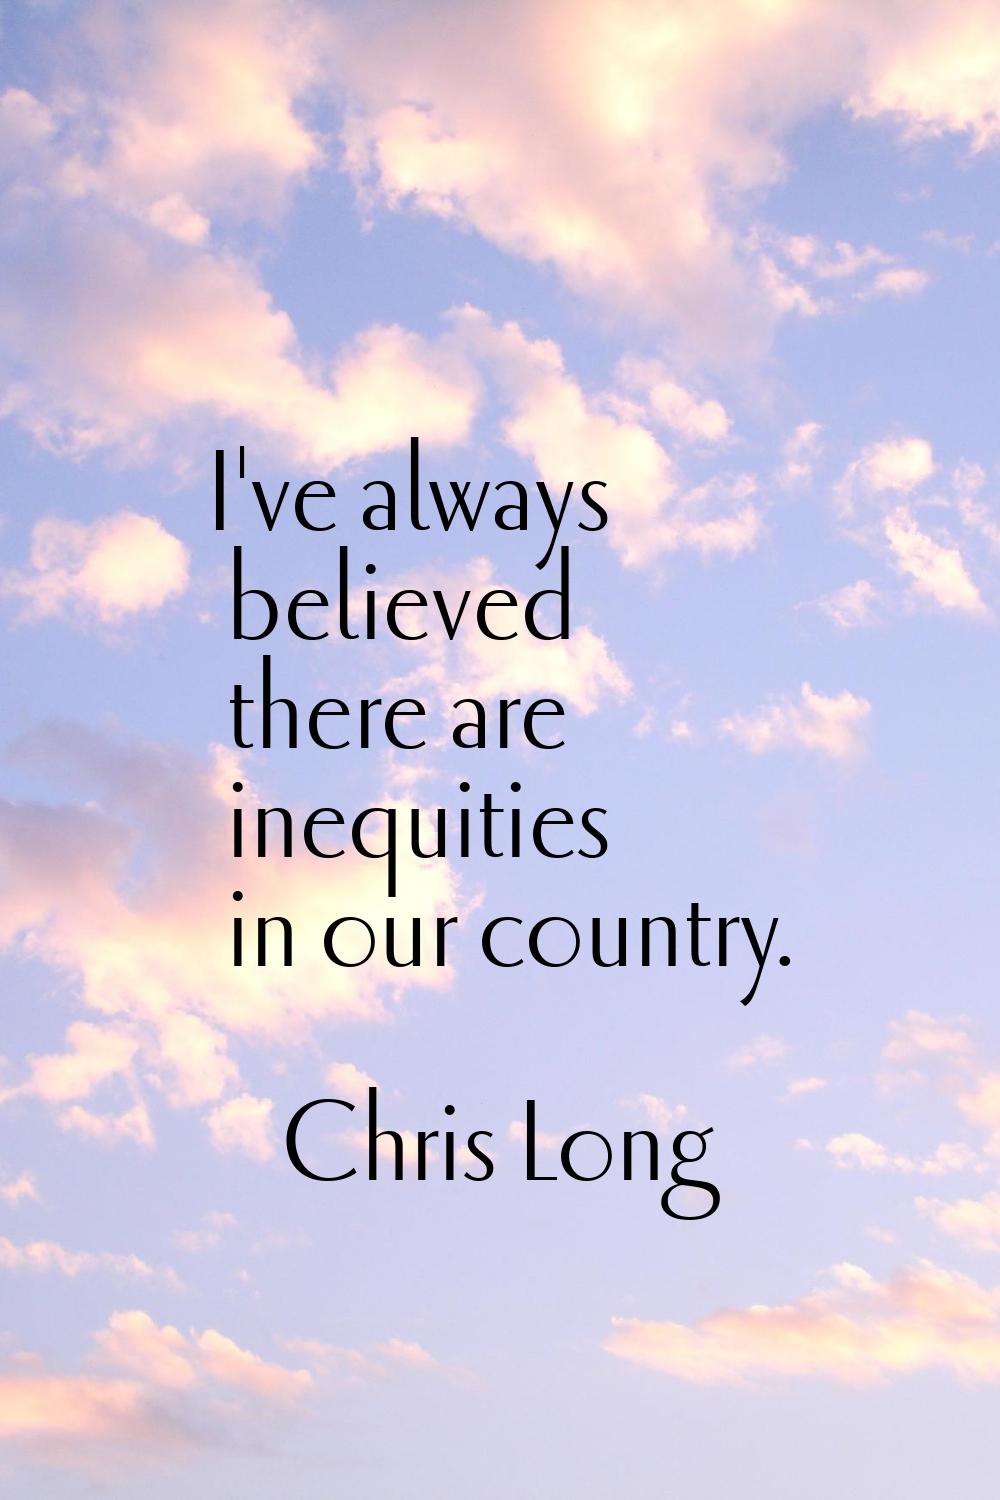 I've always believed there are inequities in our country.